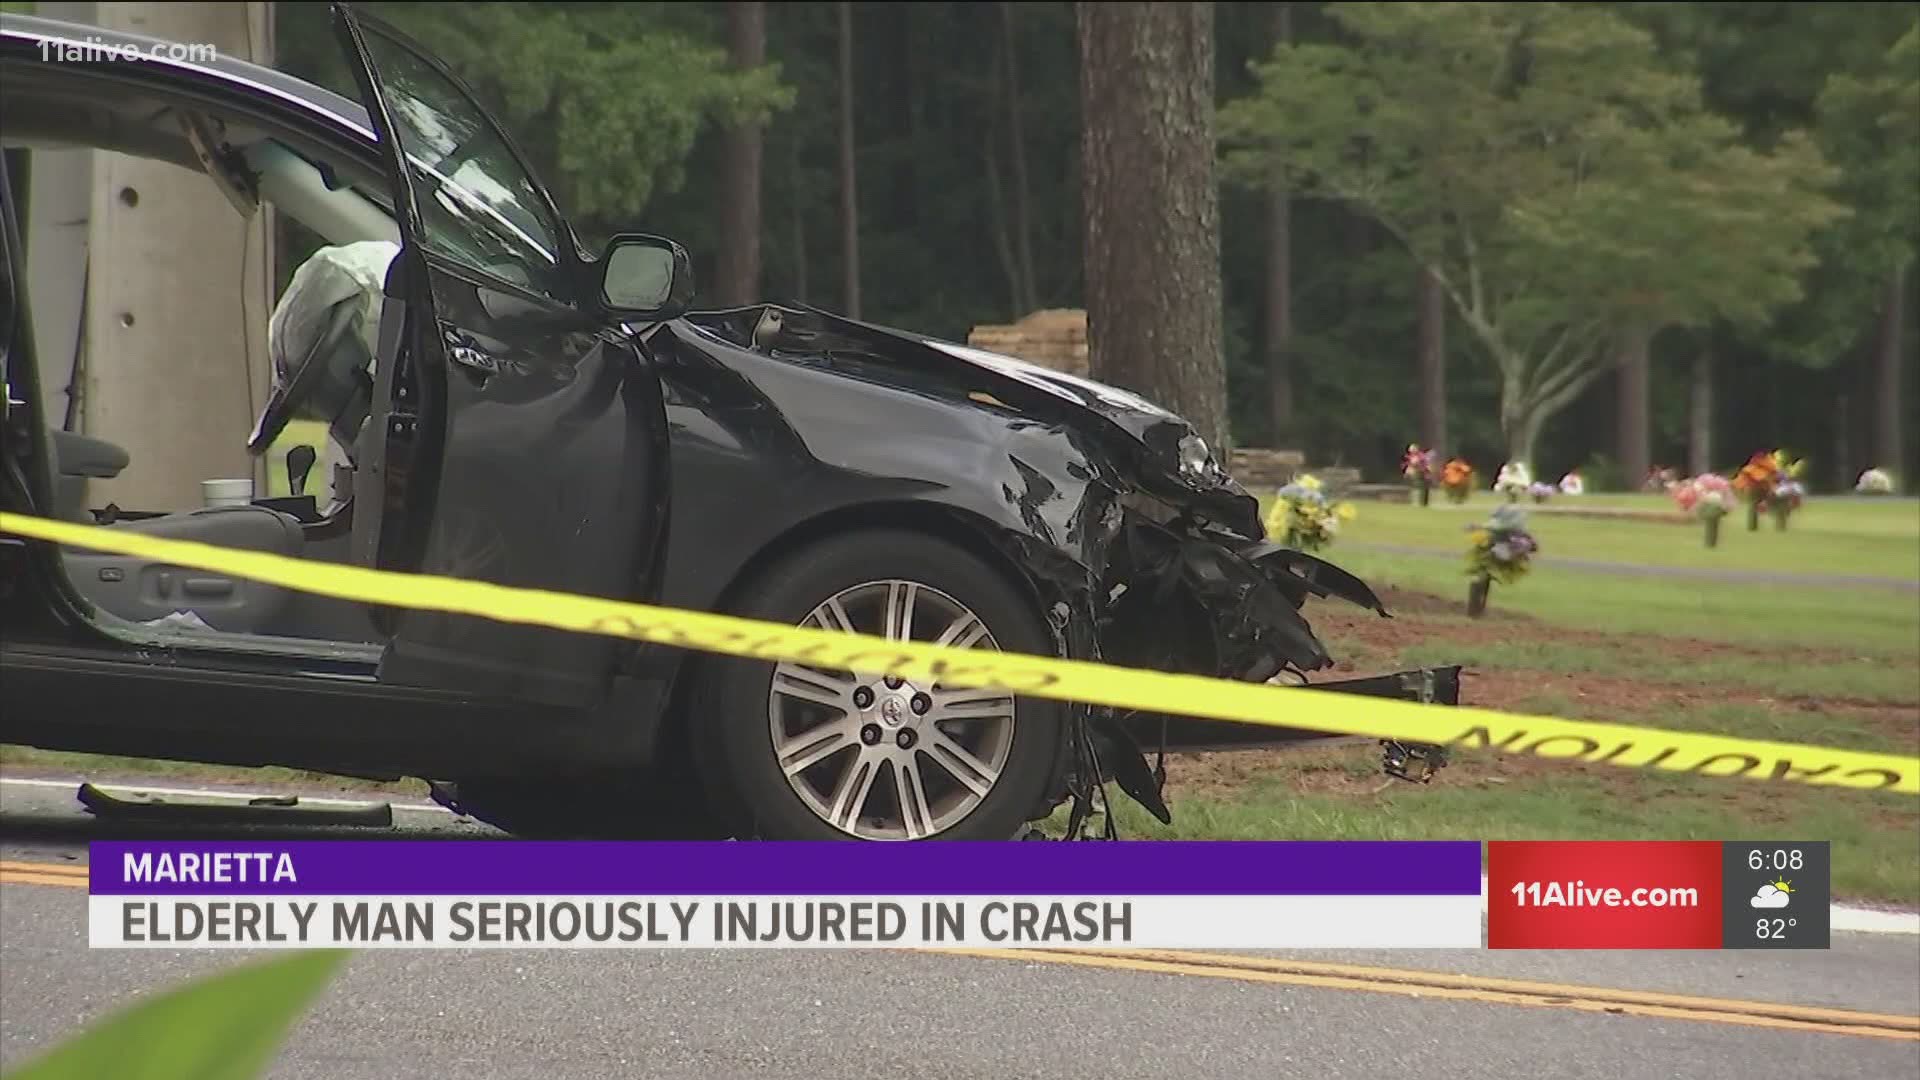 Police say a member of a group of car enthusiasts crossed the center line and hit the victim's car head-on.